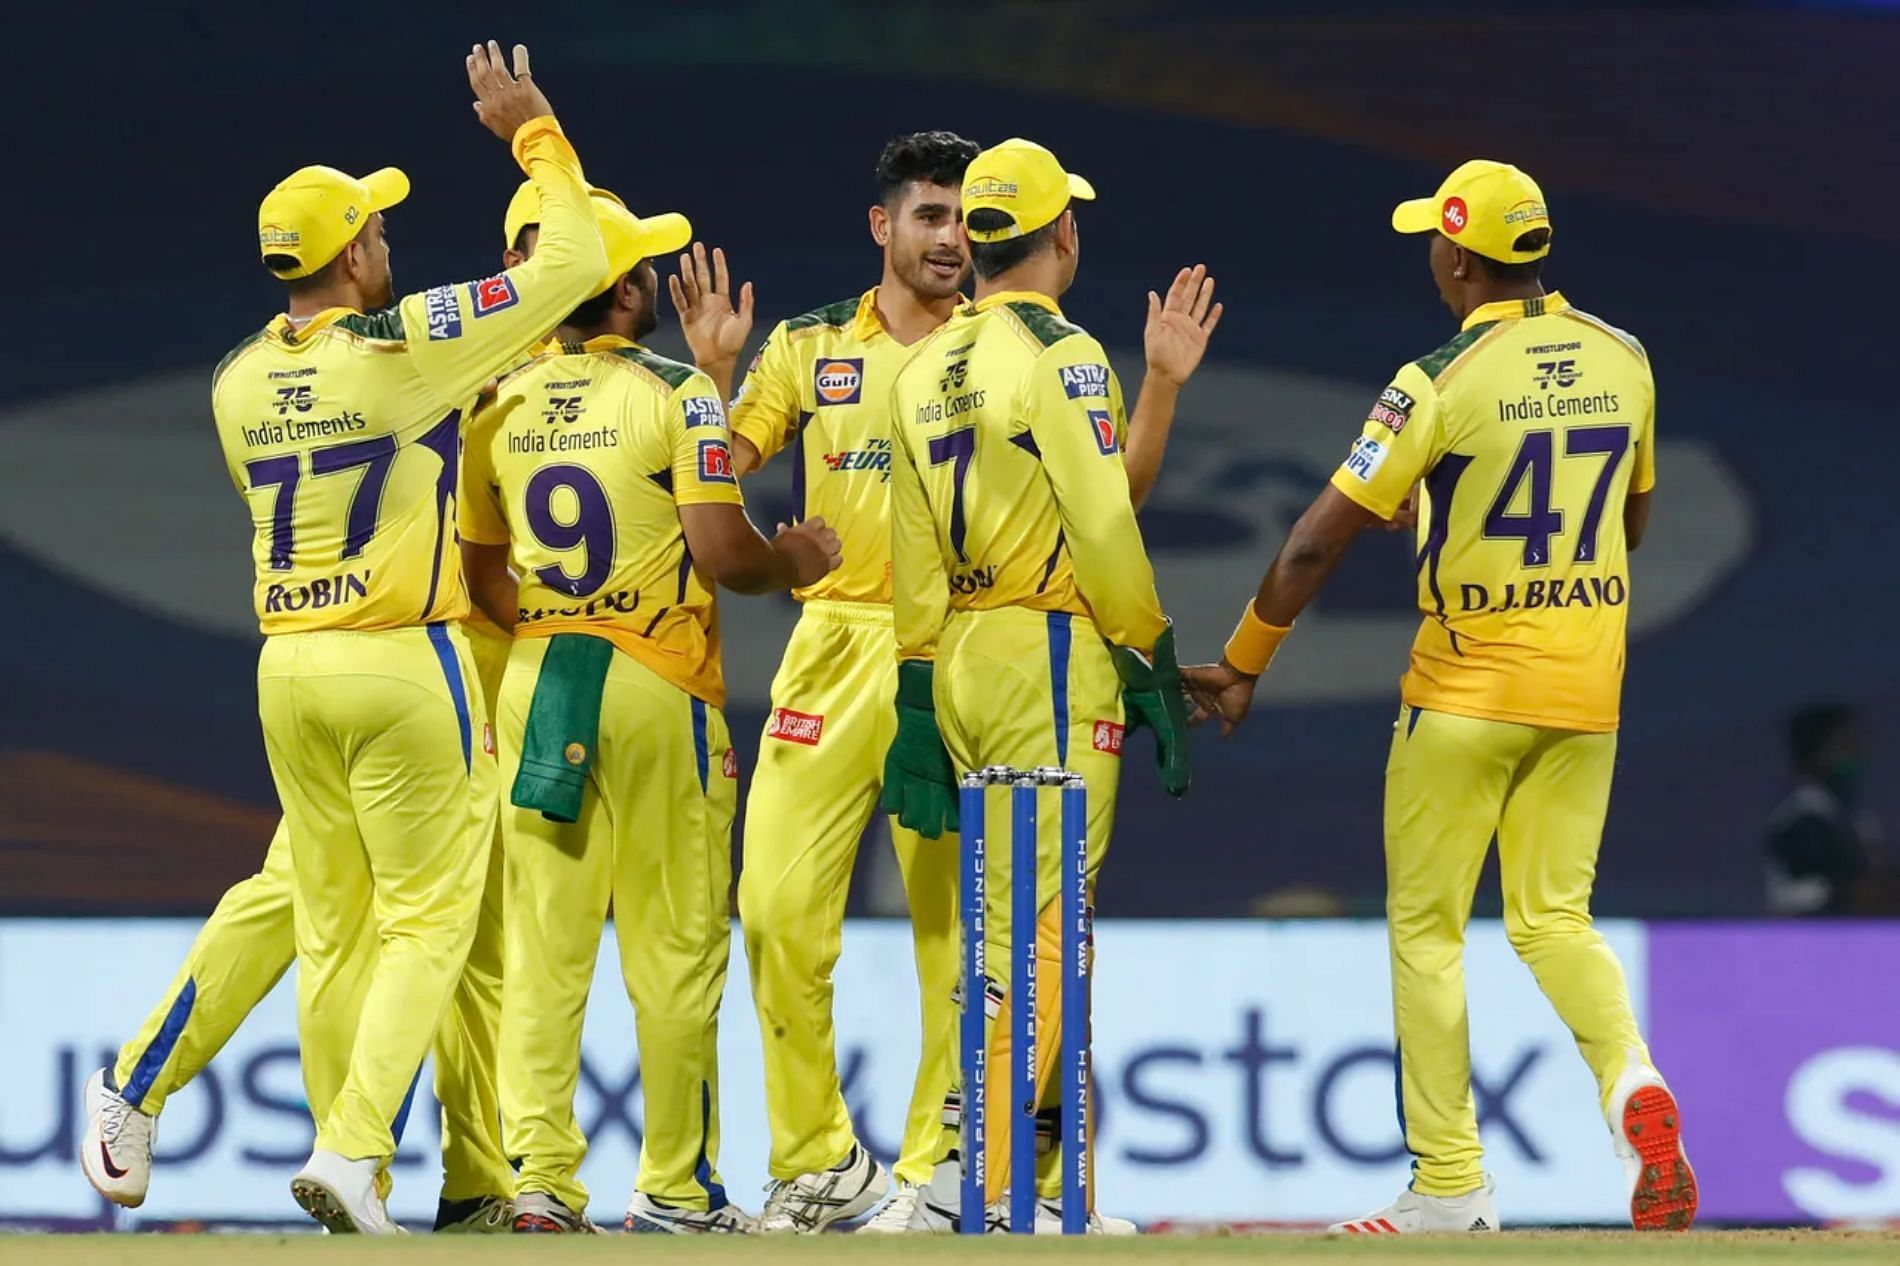 SRH vs CSK Dream 11 Prediction: Sunrisers Hyderabad vs Chennai Super Kings Top Fantasy Picks, Probable Playing XIs, Pitch Report and Match overview, SRH vs CSK Live at 7:30 PM: Follow IPL 2022 LIVE Updates